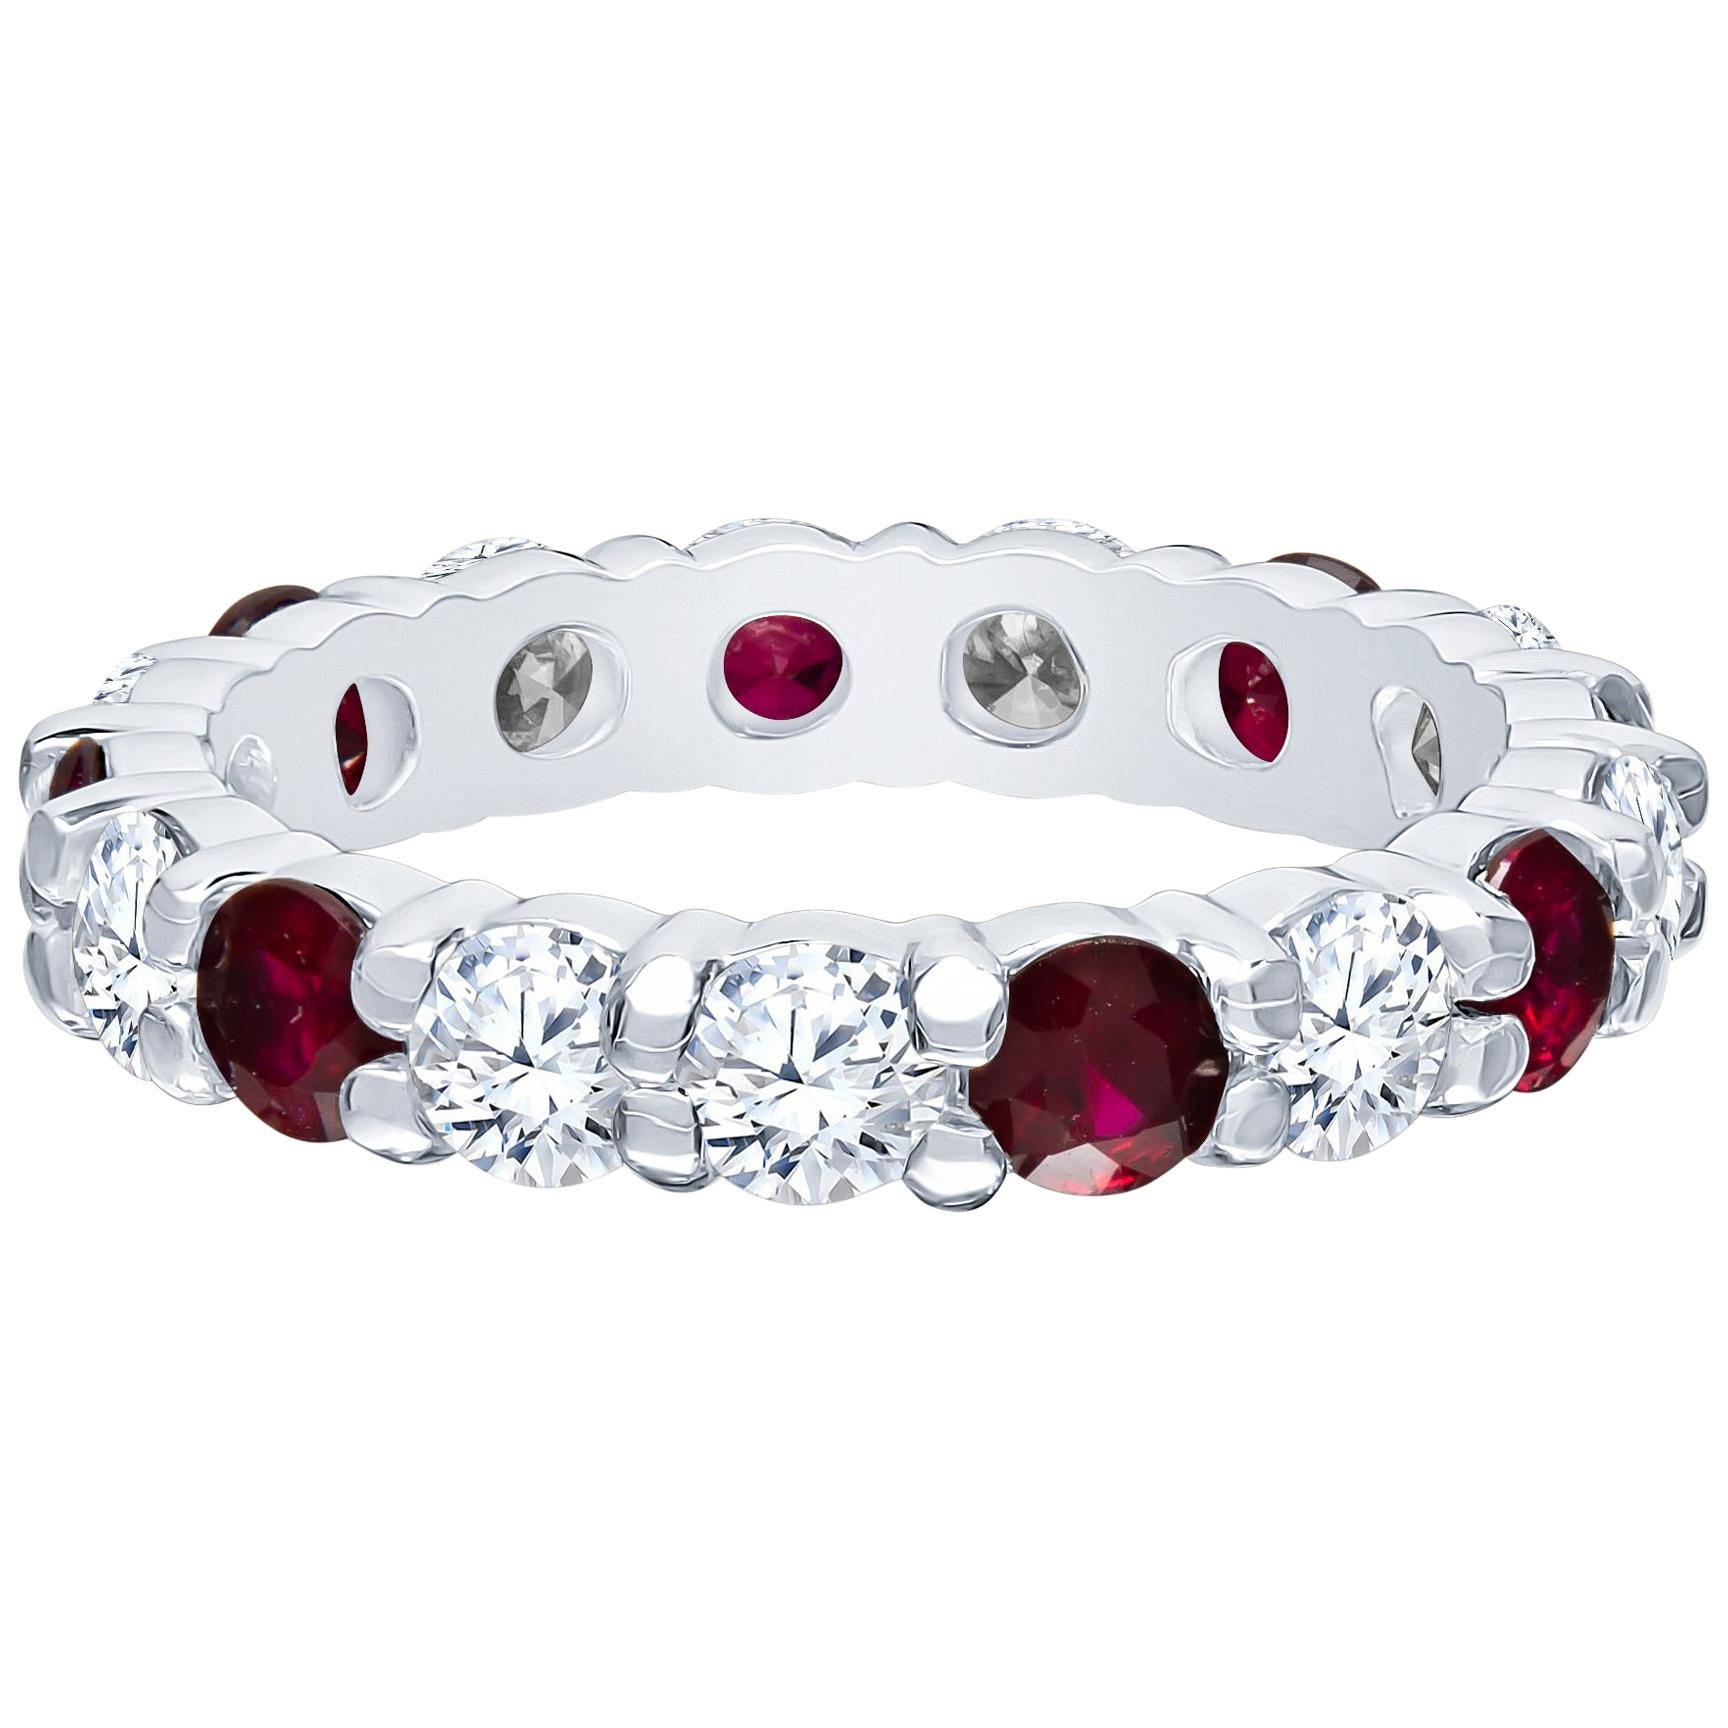 1.49 Carat Total Ruby with 1.53 Carat Total Diamonds, Platinum Eternity Band